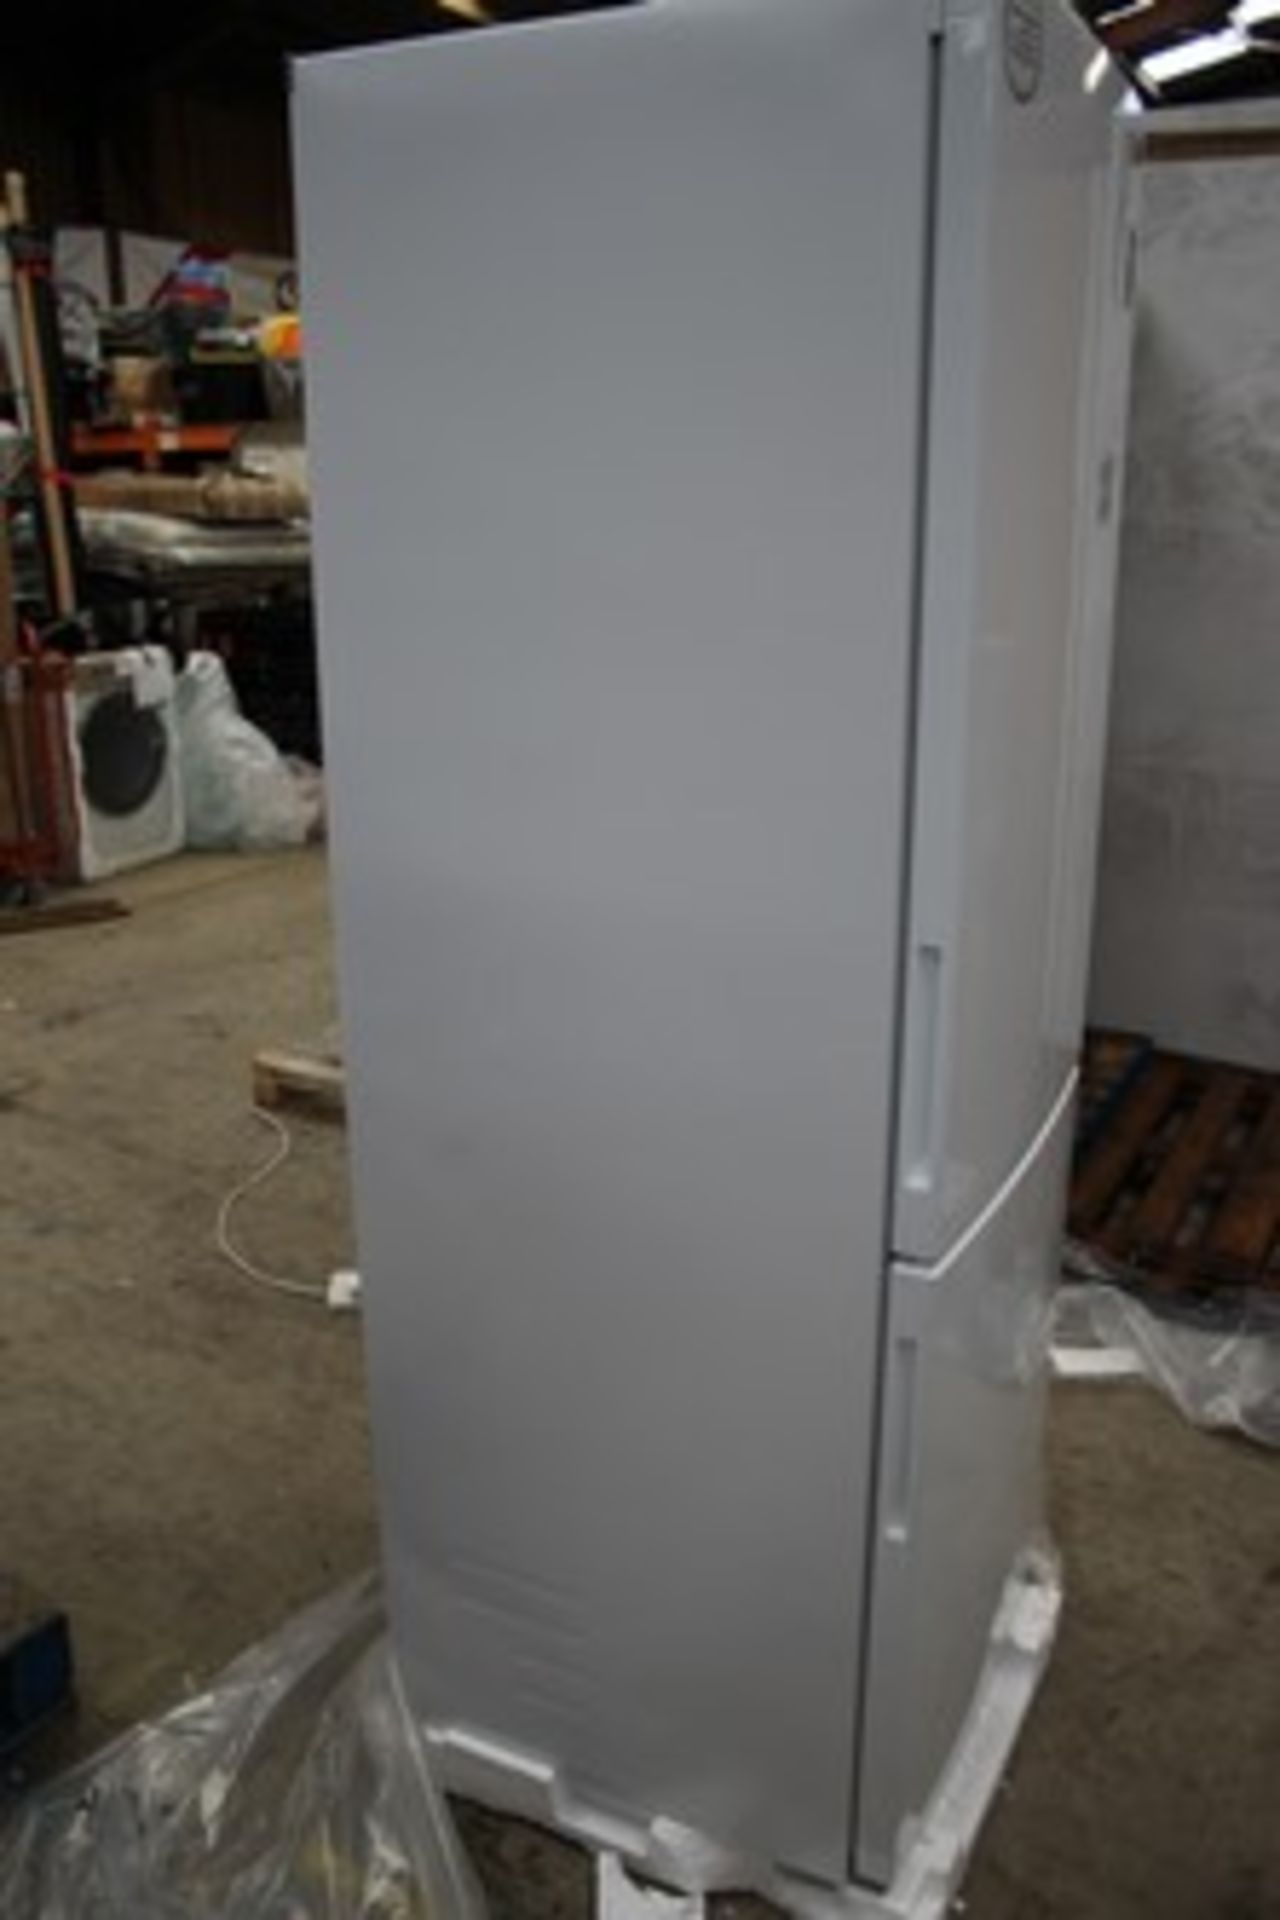 1 x LG Freestanding fridge freezer - white model: GBB61SWJEC Grade B, small dents and scratches on - Image 5 of 7